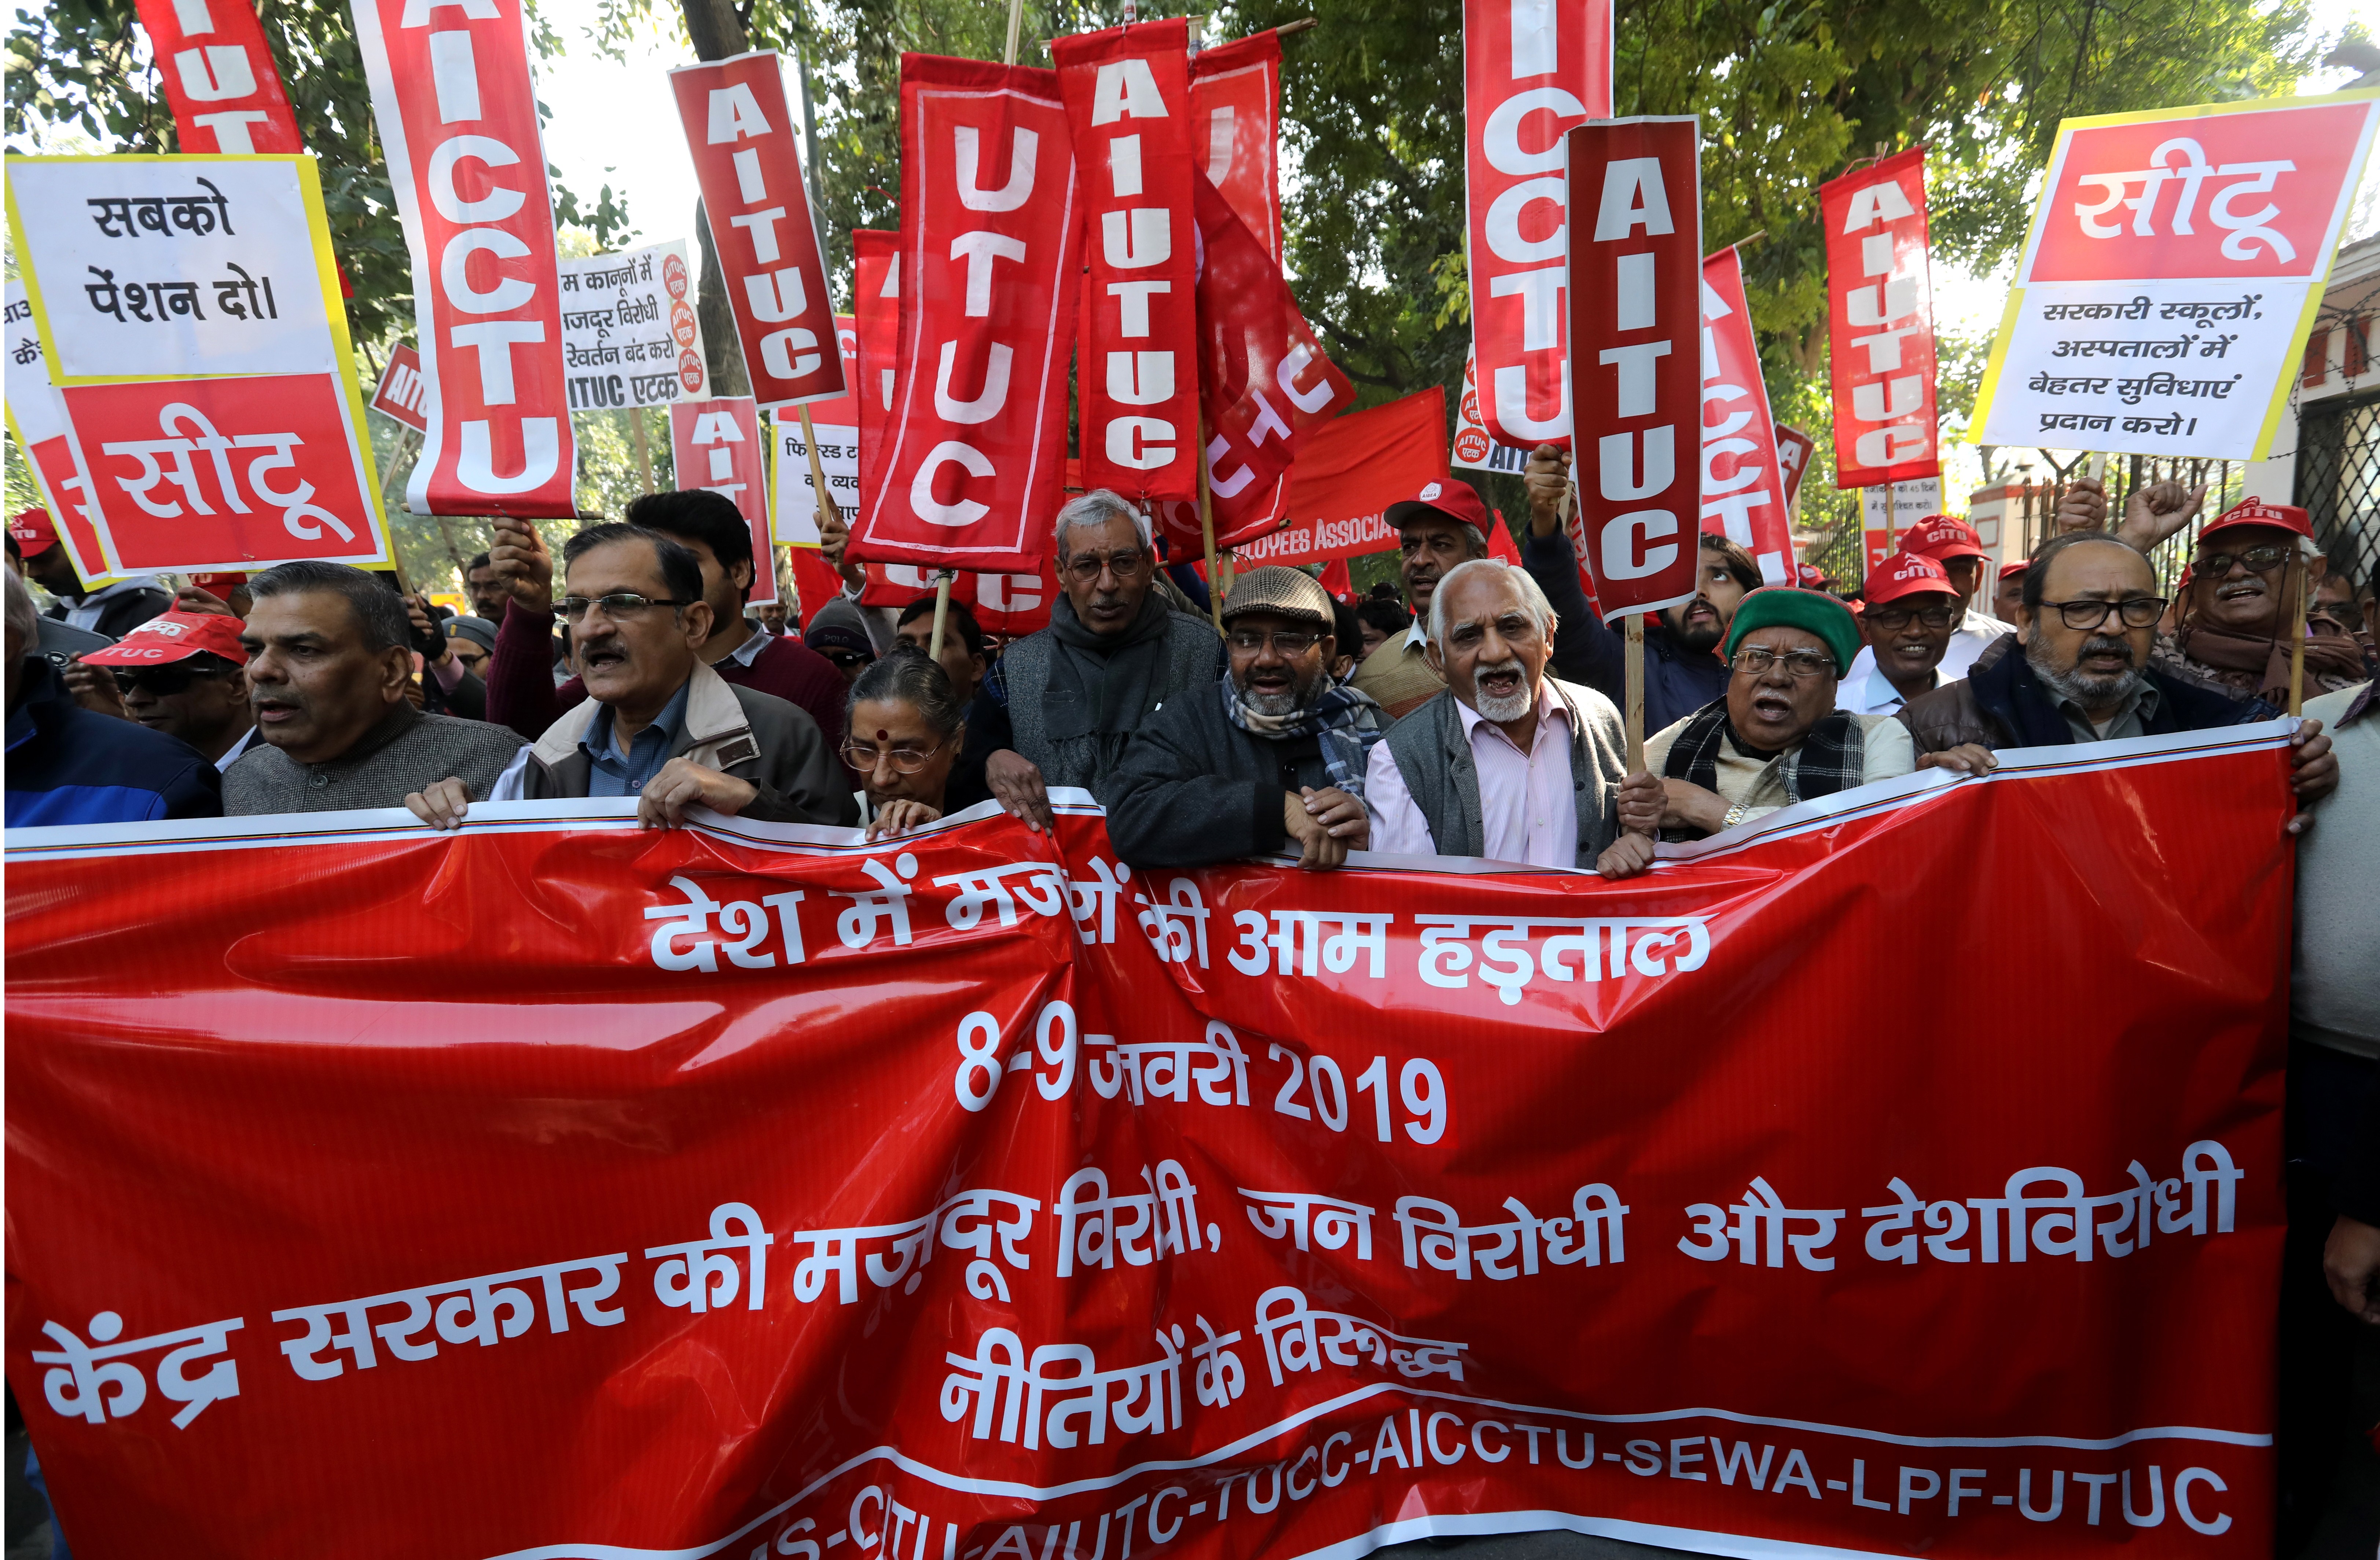 Trade unionists protest in Delhi earlier this month, one of a wave of strikes ahead of this year’s general election. Photo: EPA-EFE